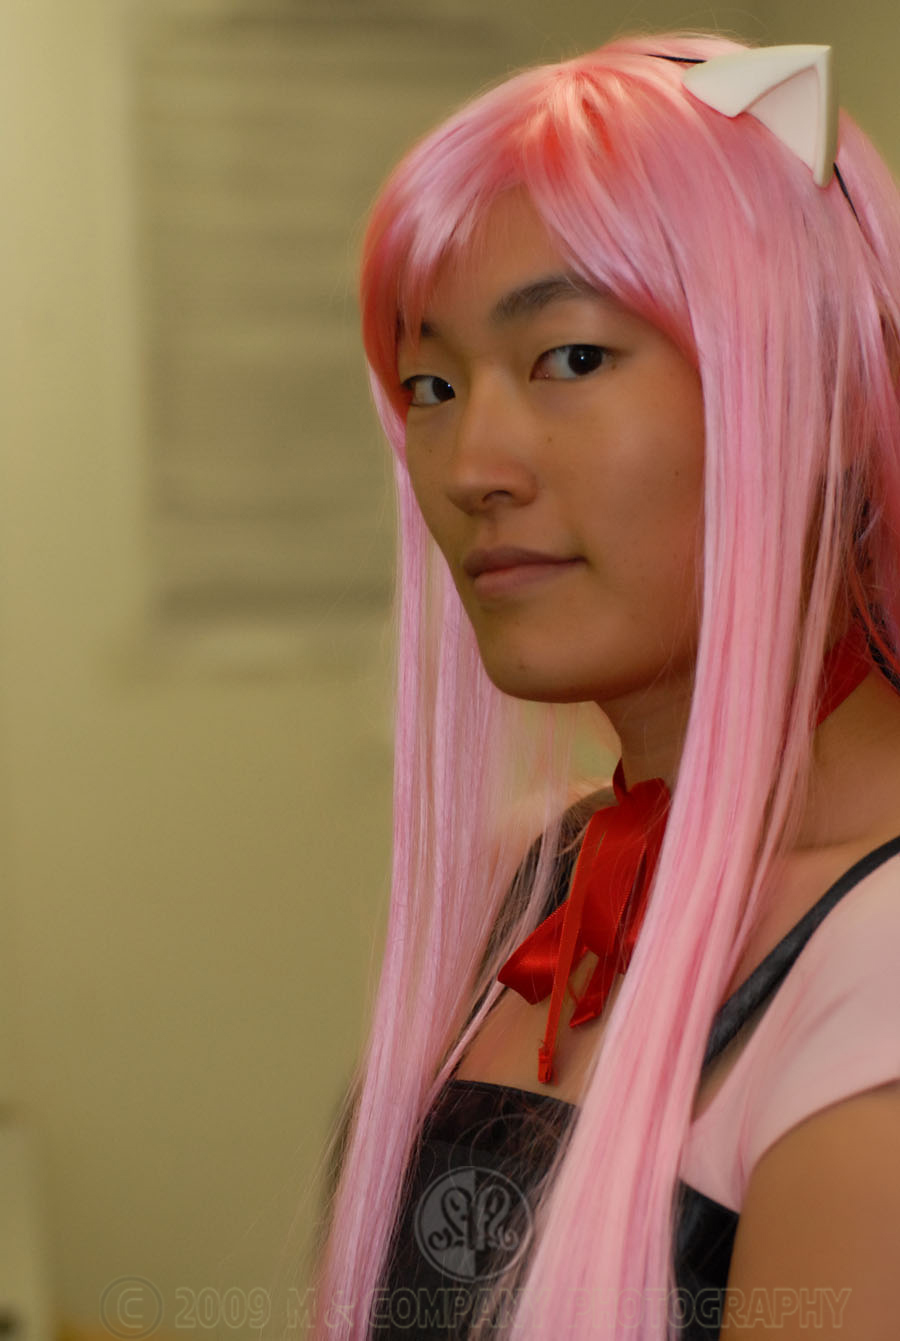 a woman with pink hair and bangs wearing a bow